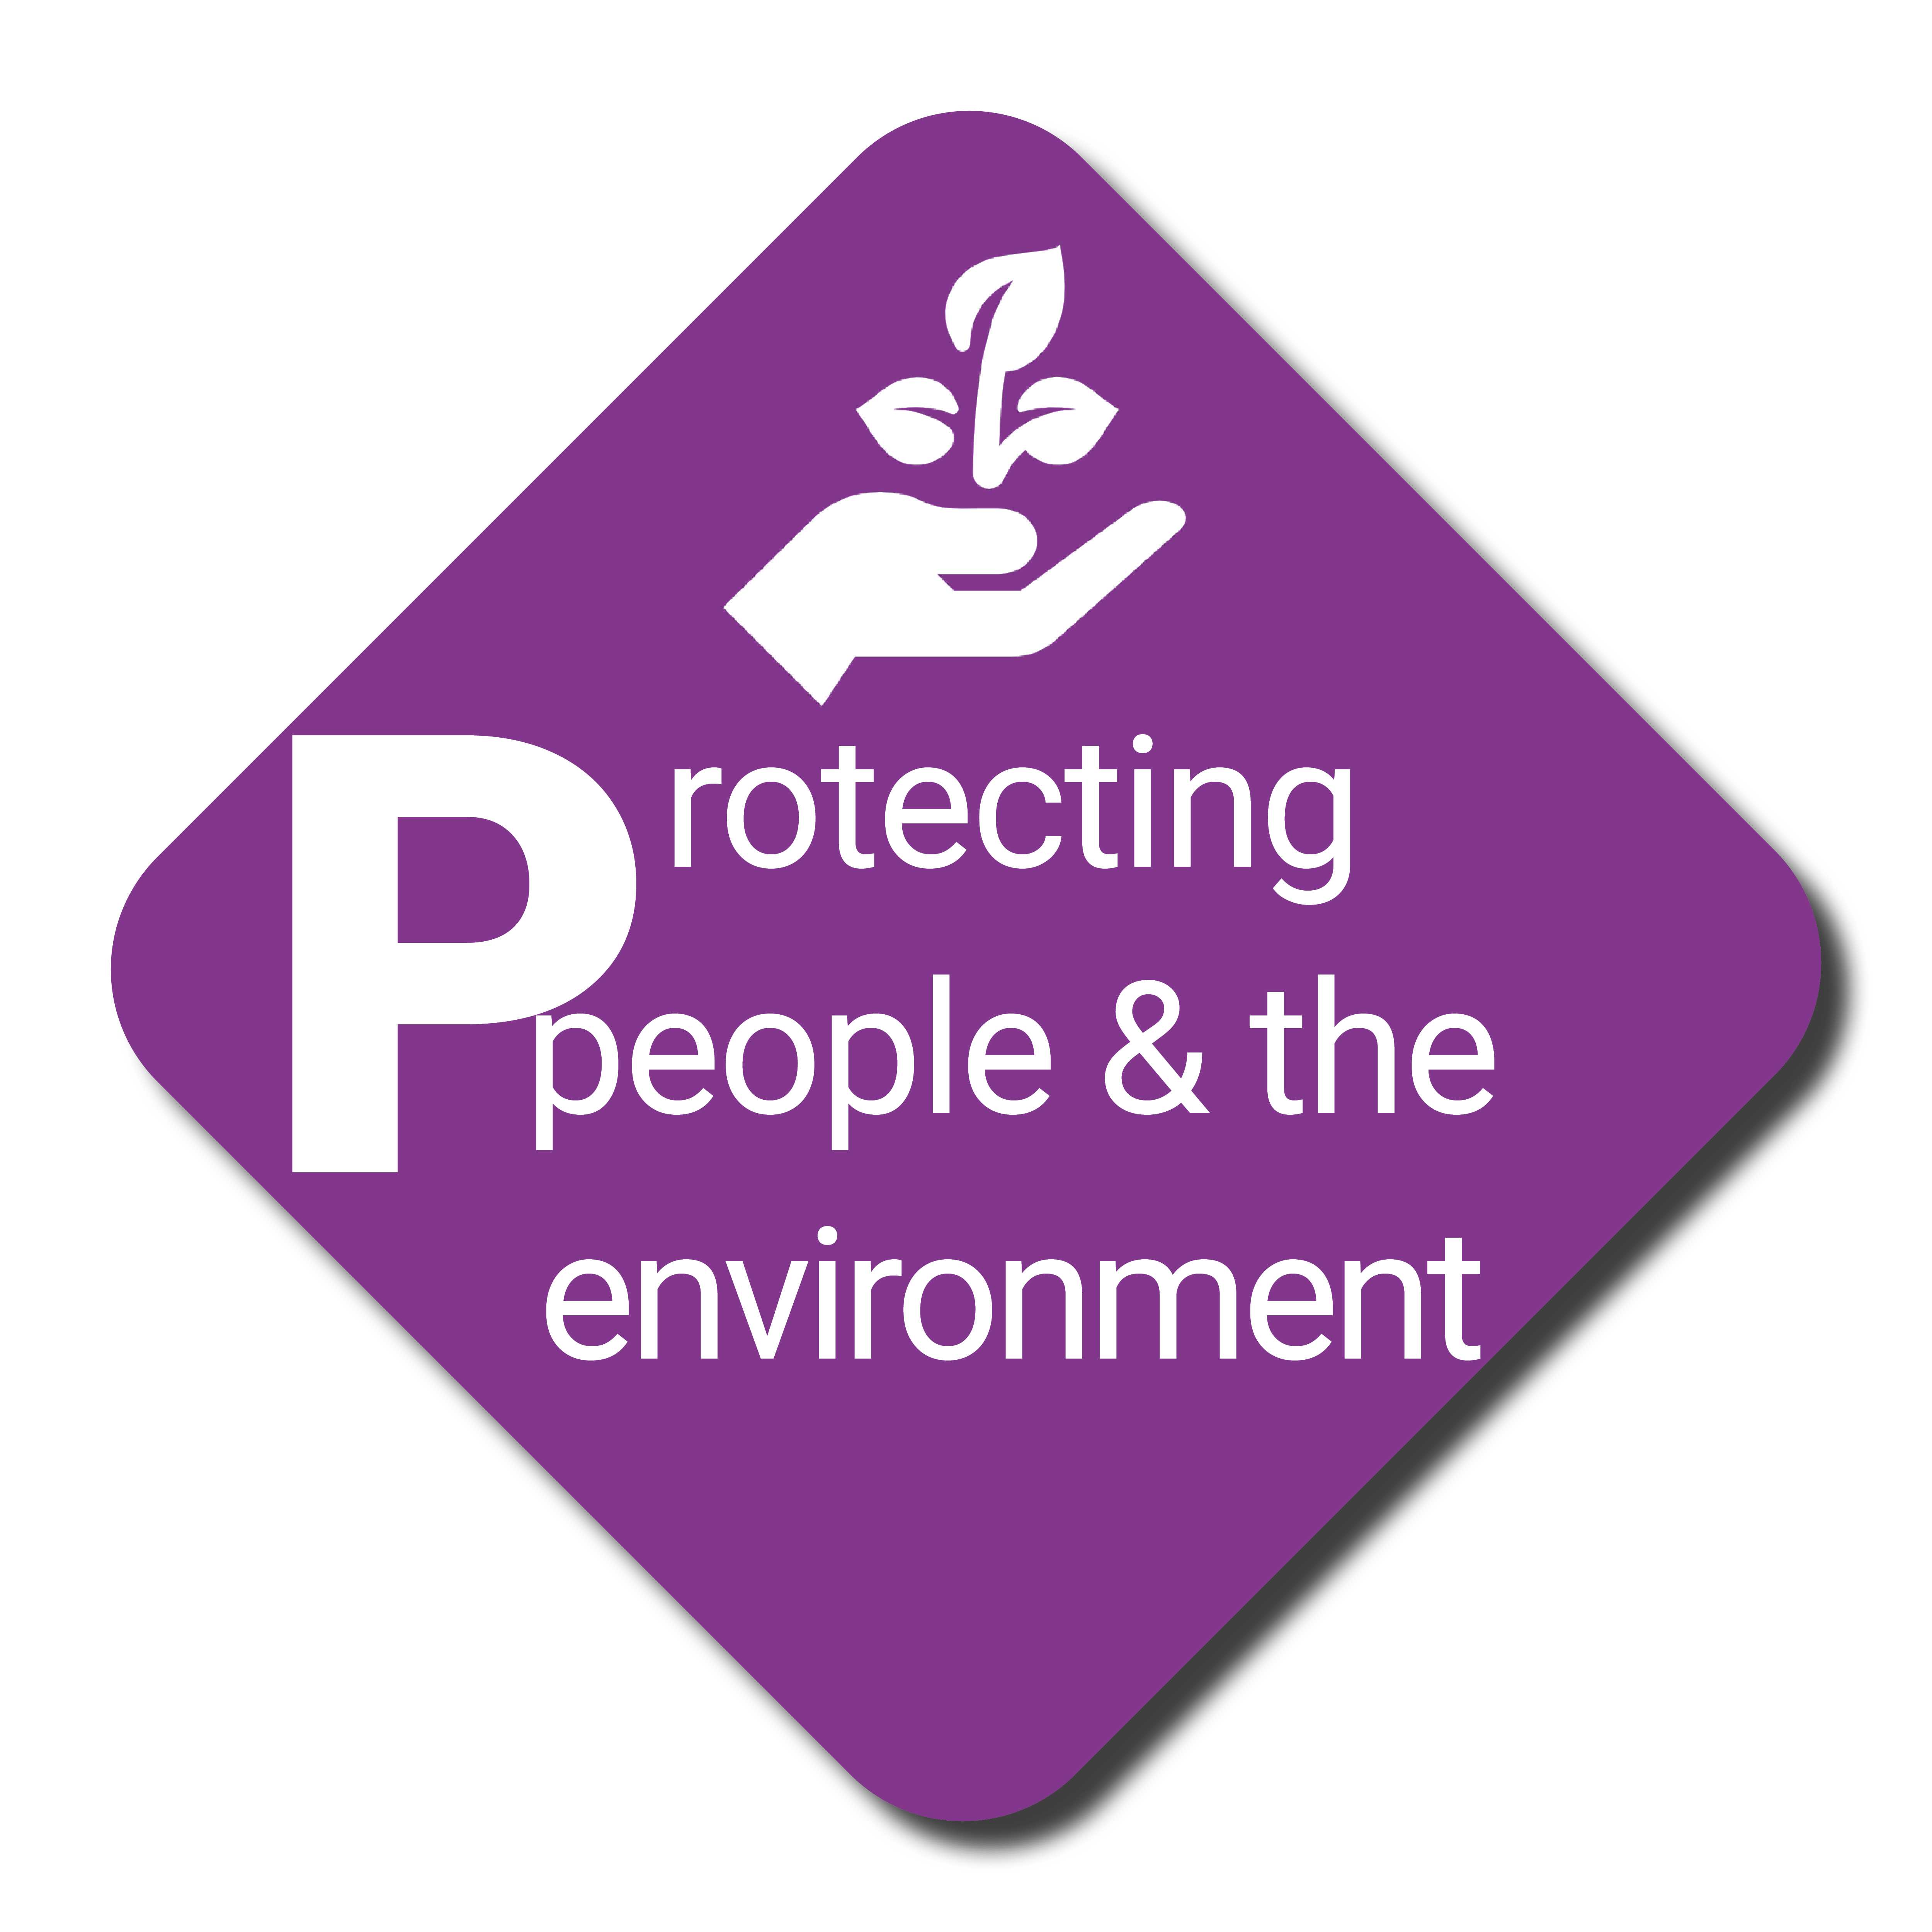 Protecting People & the environment